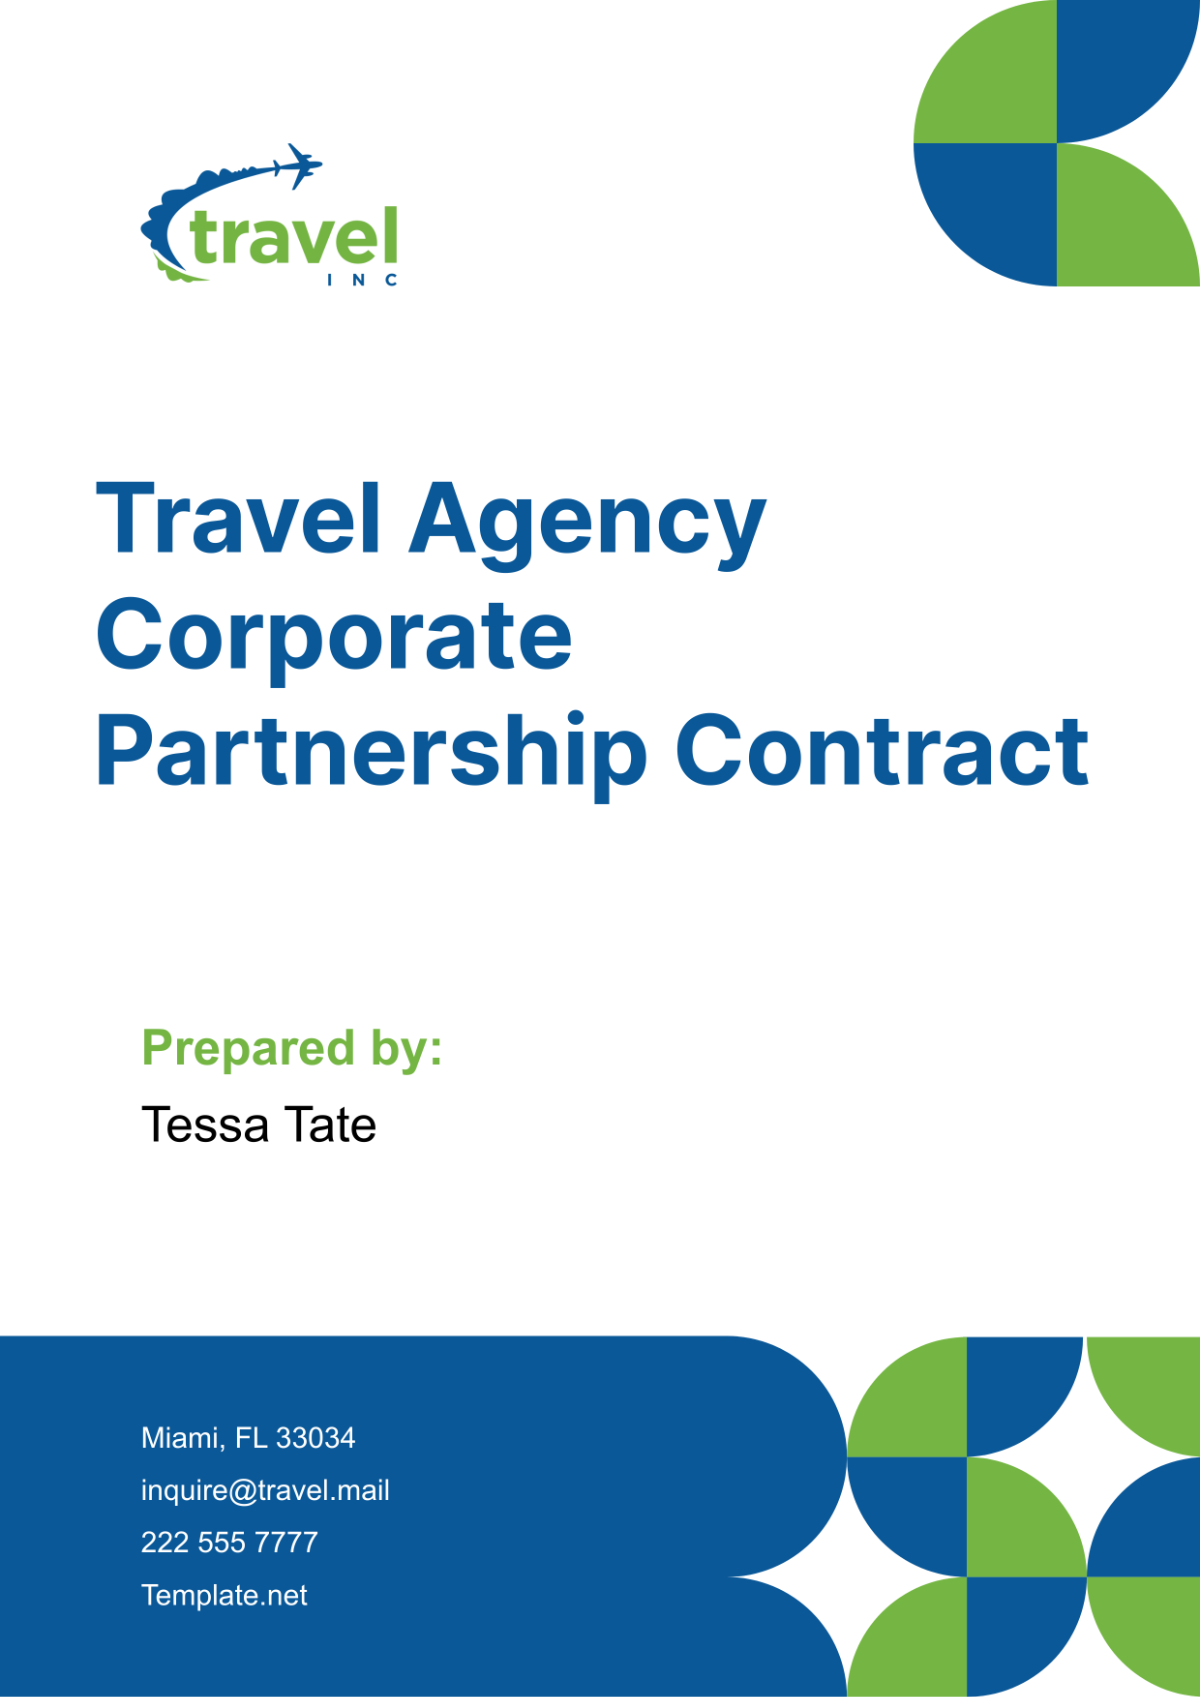 Travel Agency Corporate Partnership Contract Template